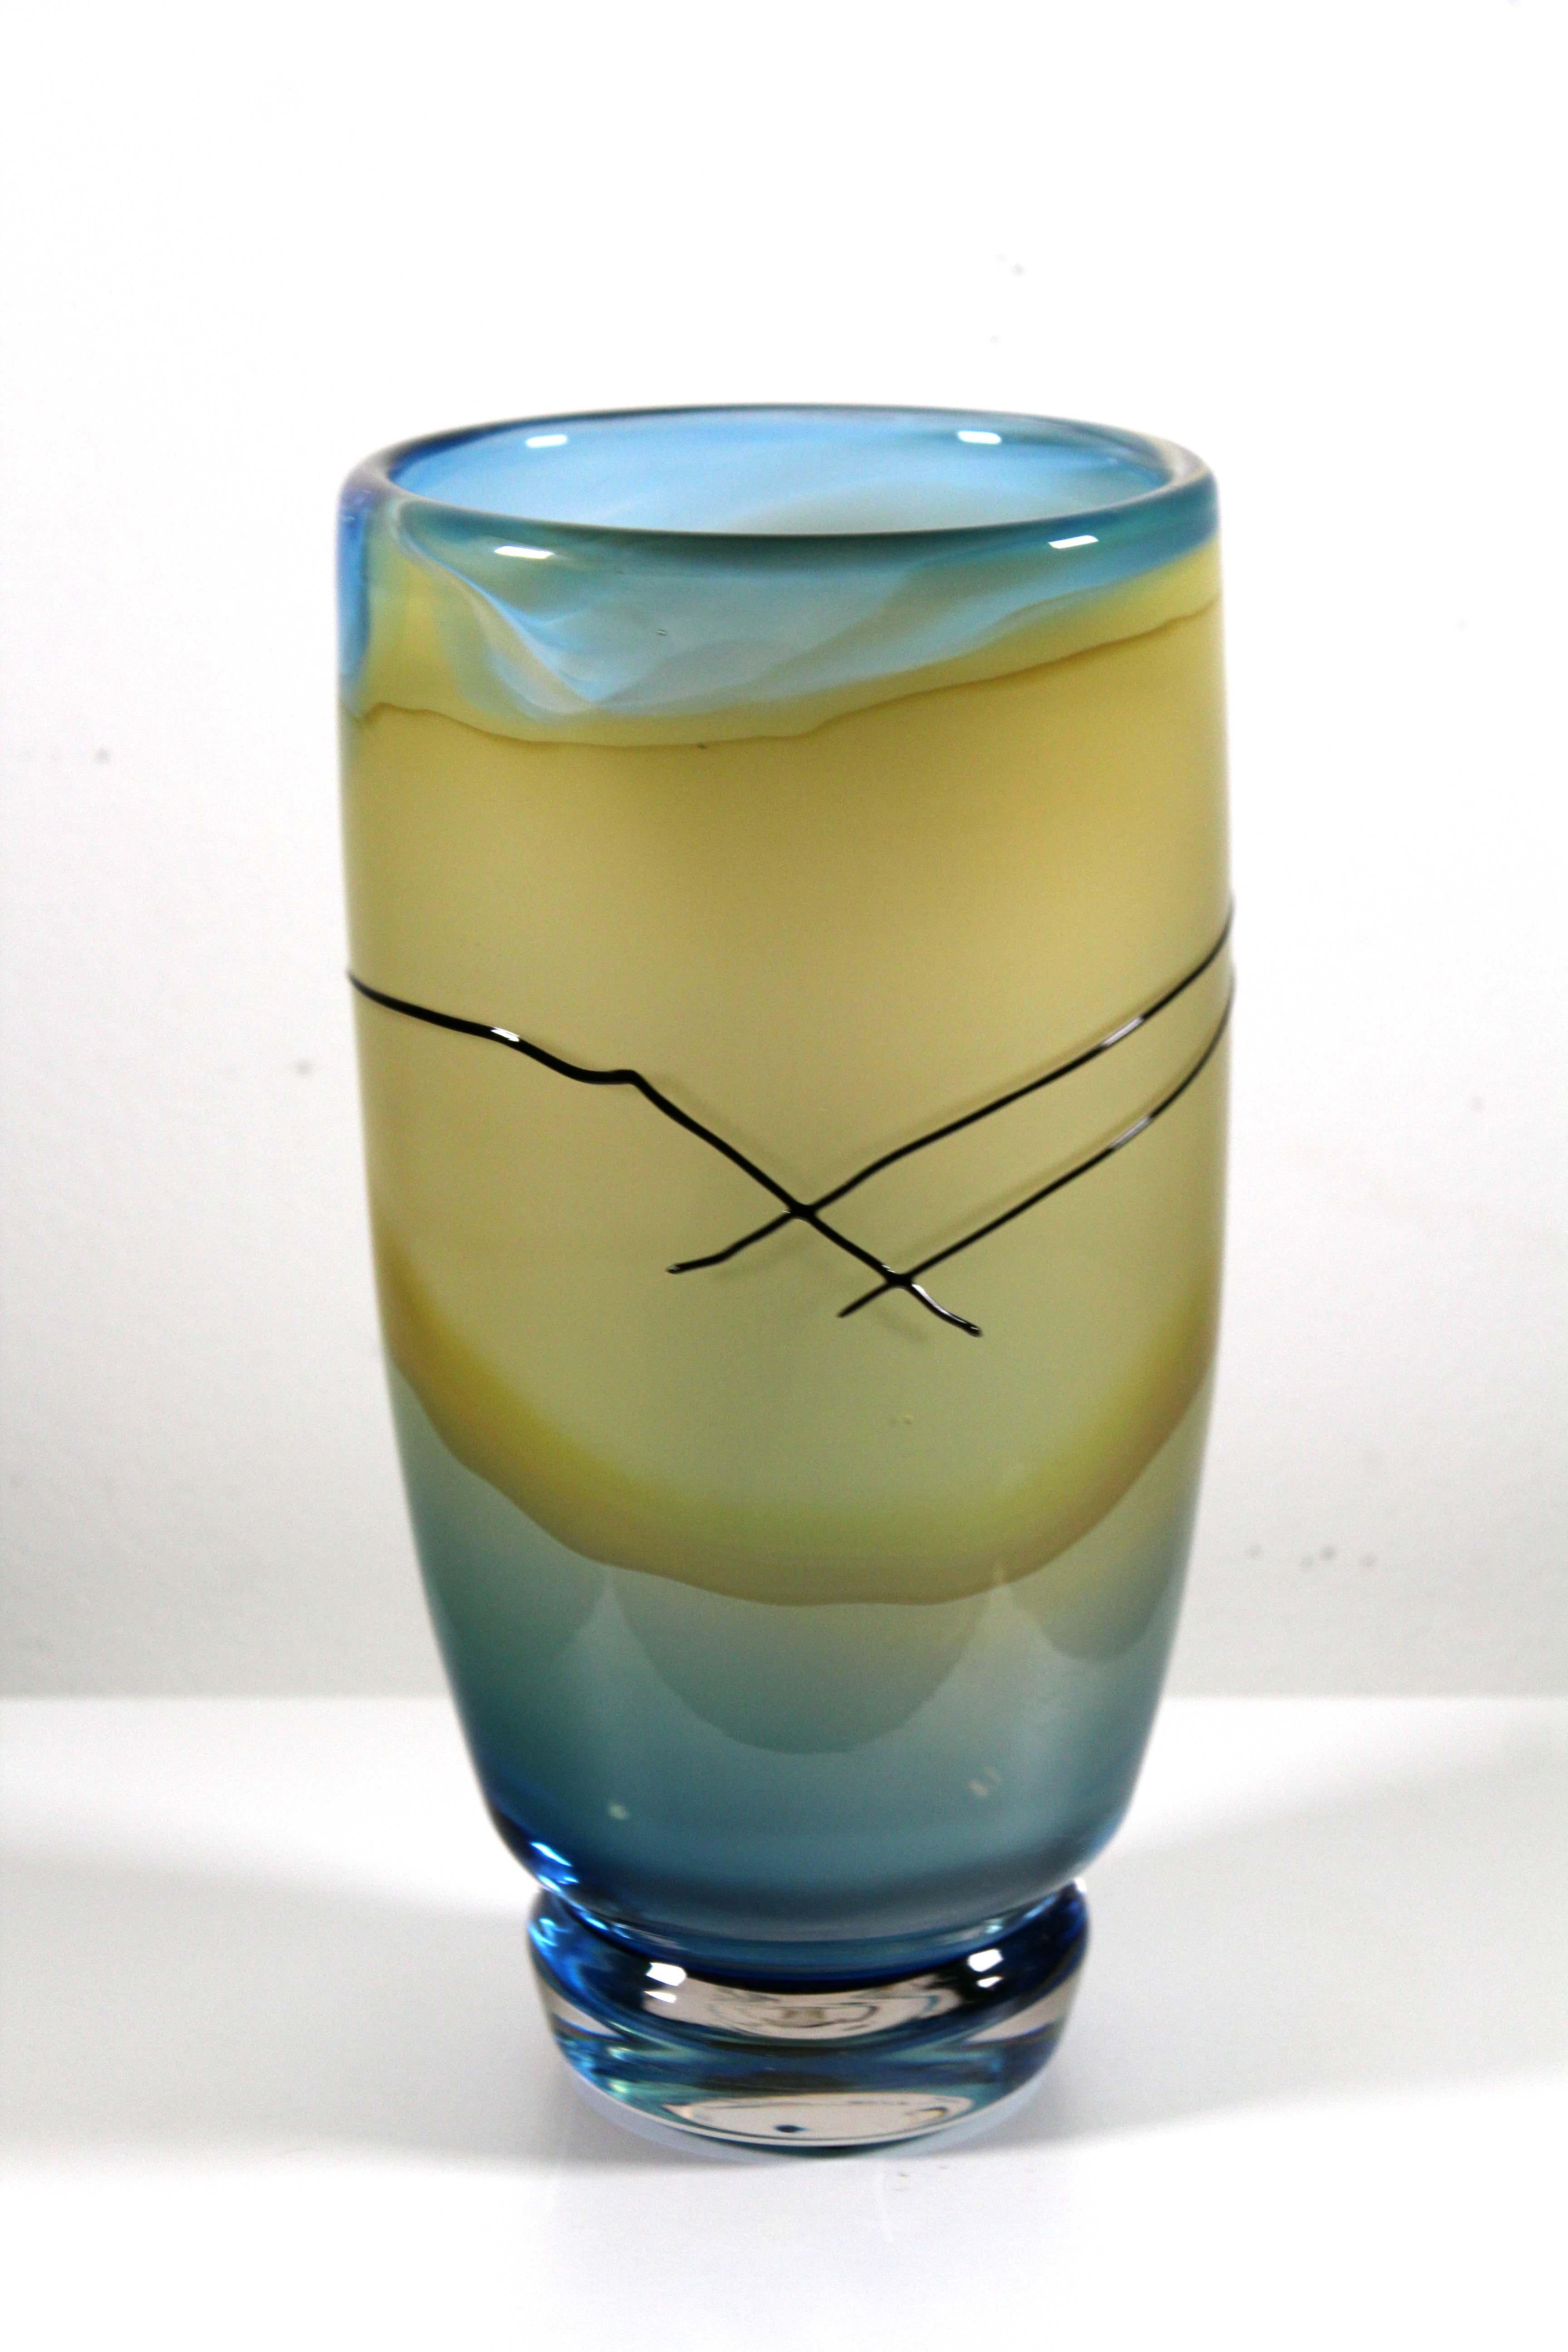 A postmodern handblown glass vase by Jack Schmidt. Etched signature on bottom and dated 1986. The vase has a serene golden yellow with aqua blue color palate and the artist added a stylized bold black line providing a contrast. From a private